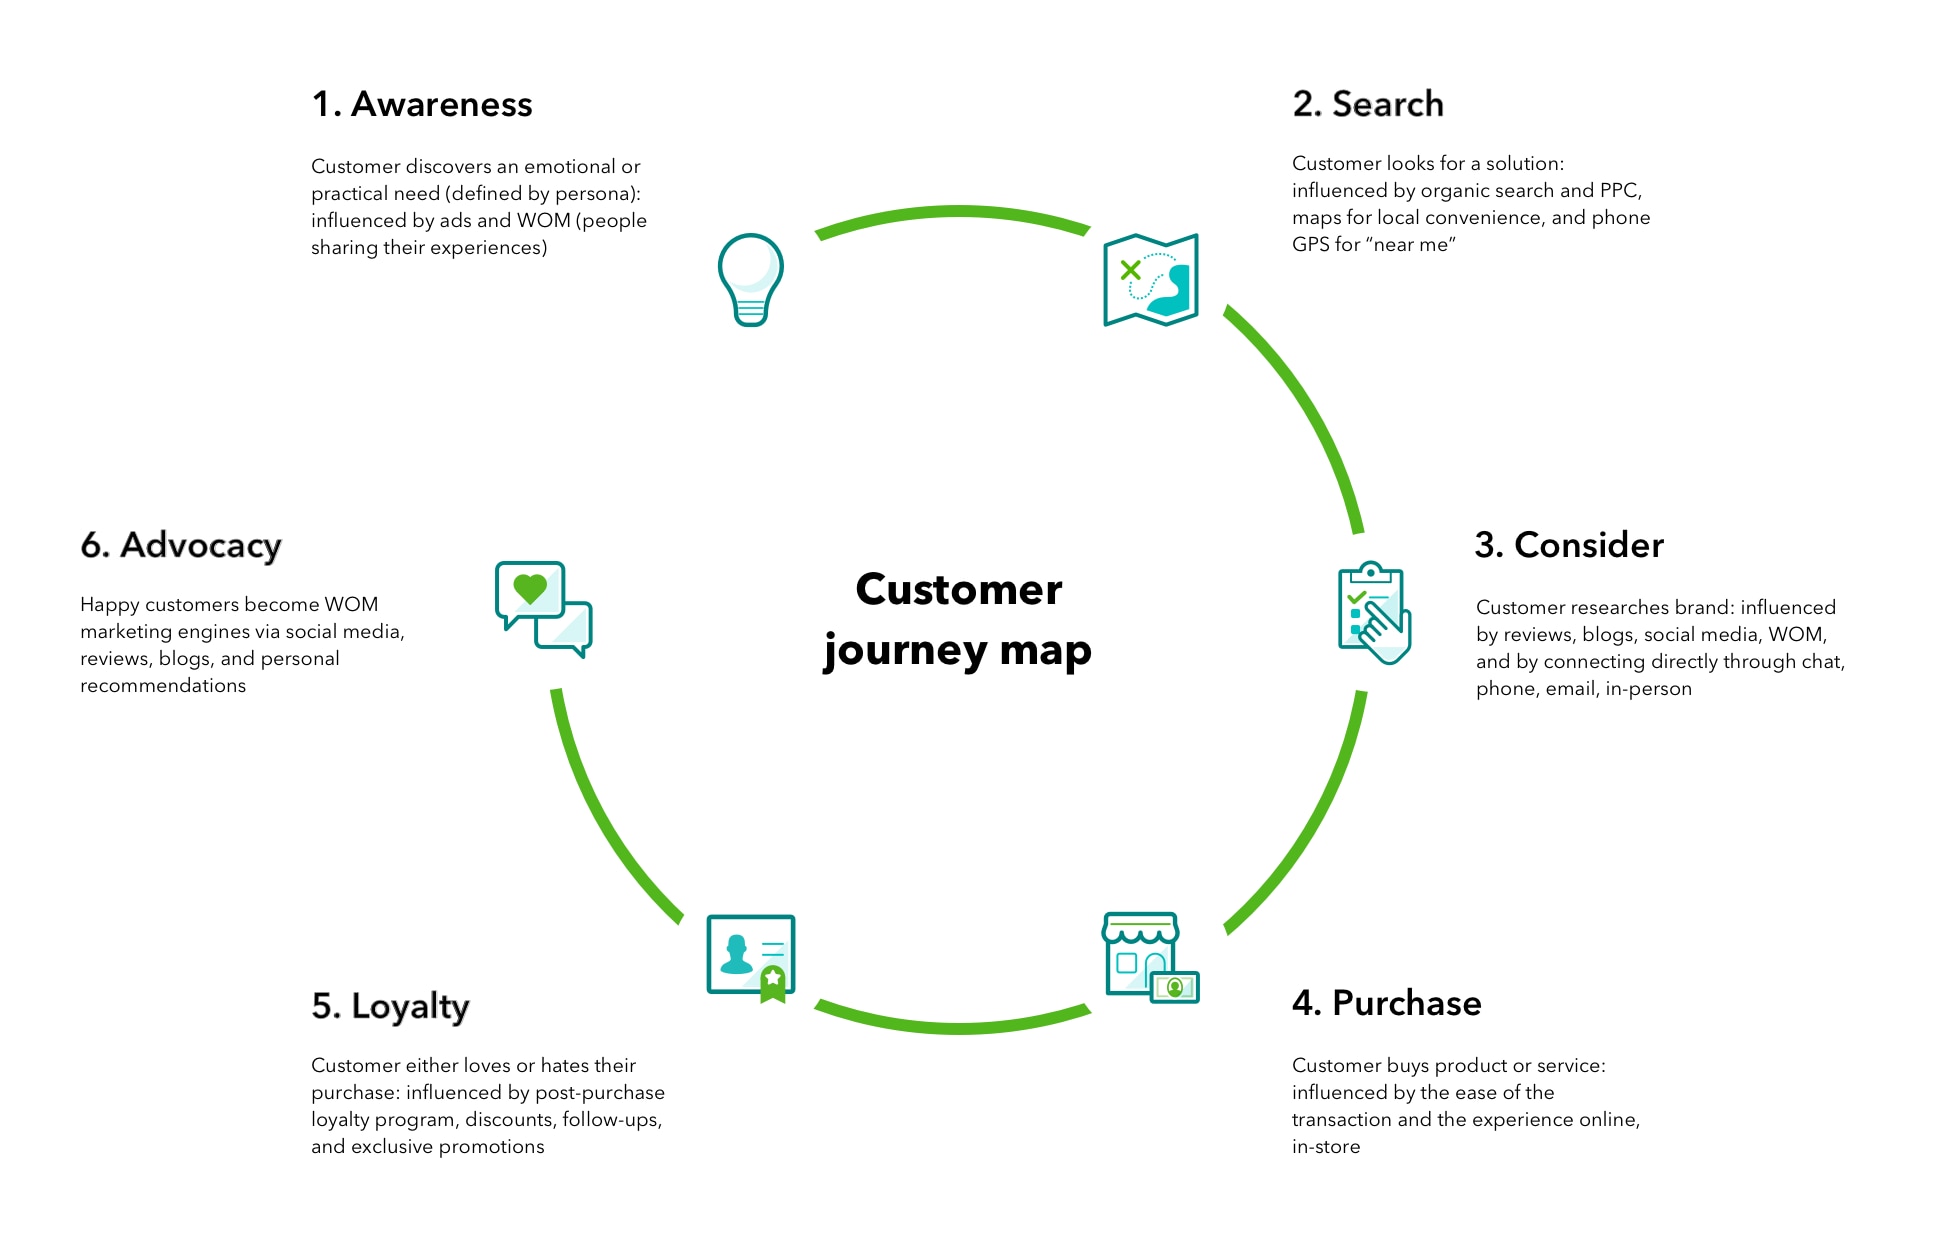 Using a business plan template to map customer journeys.